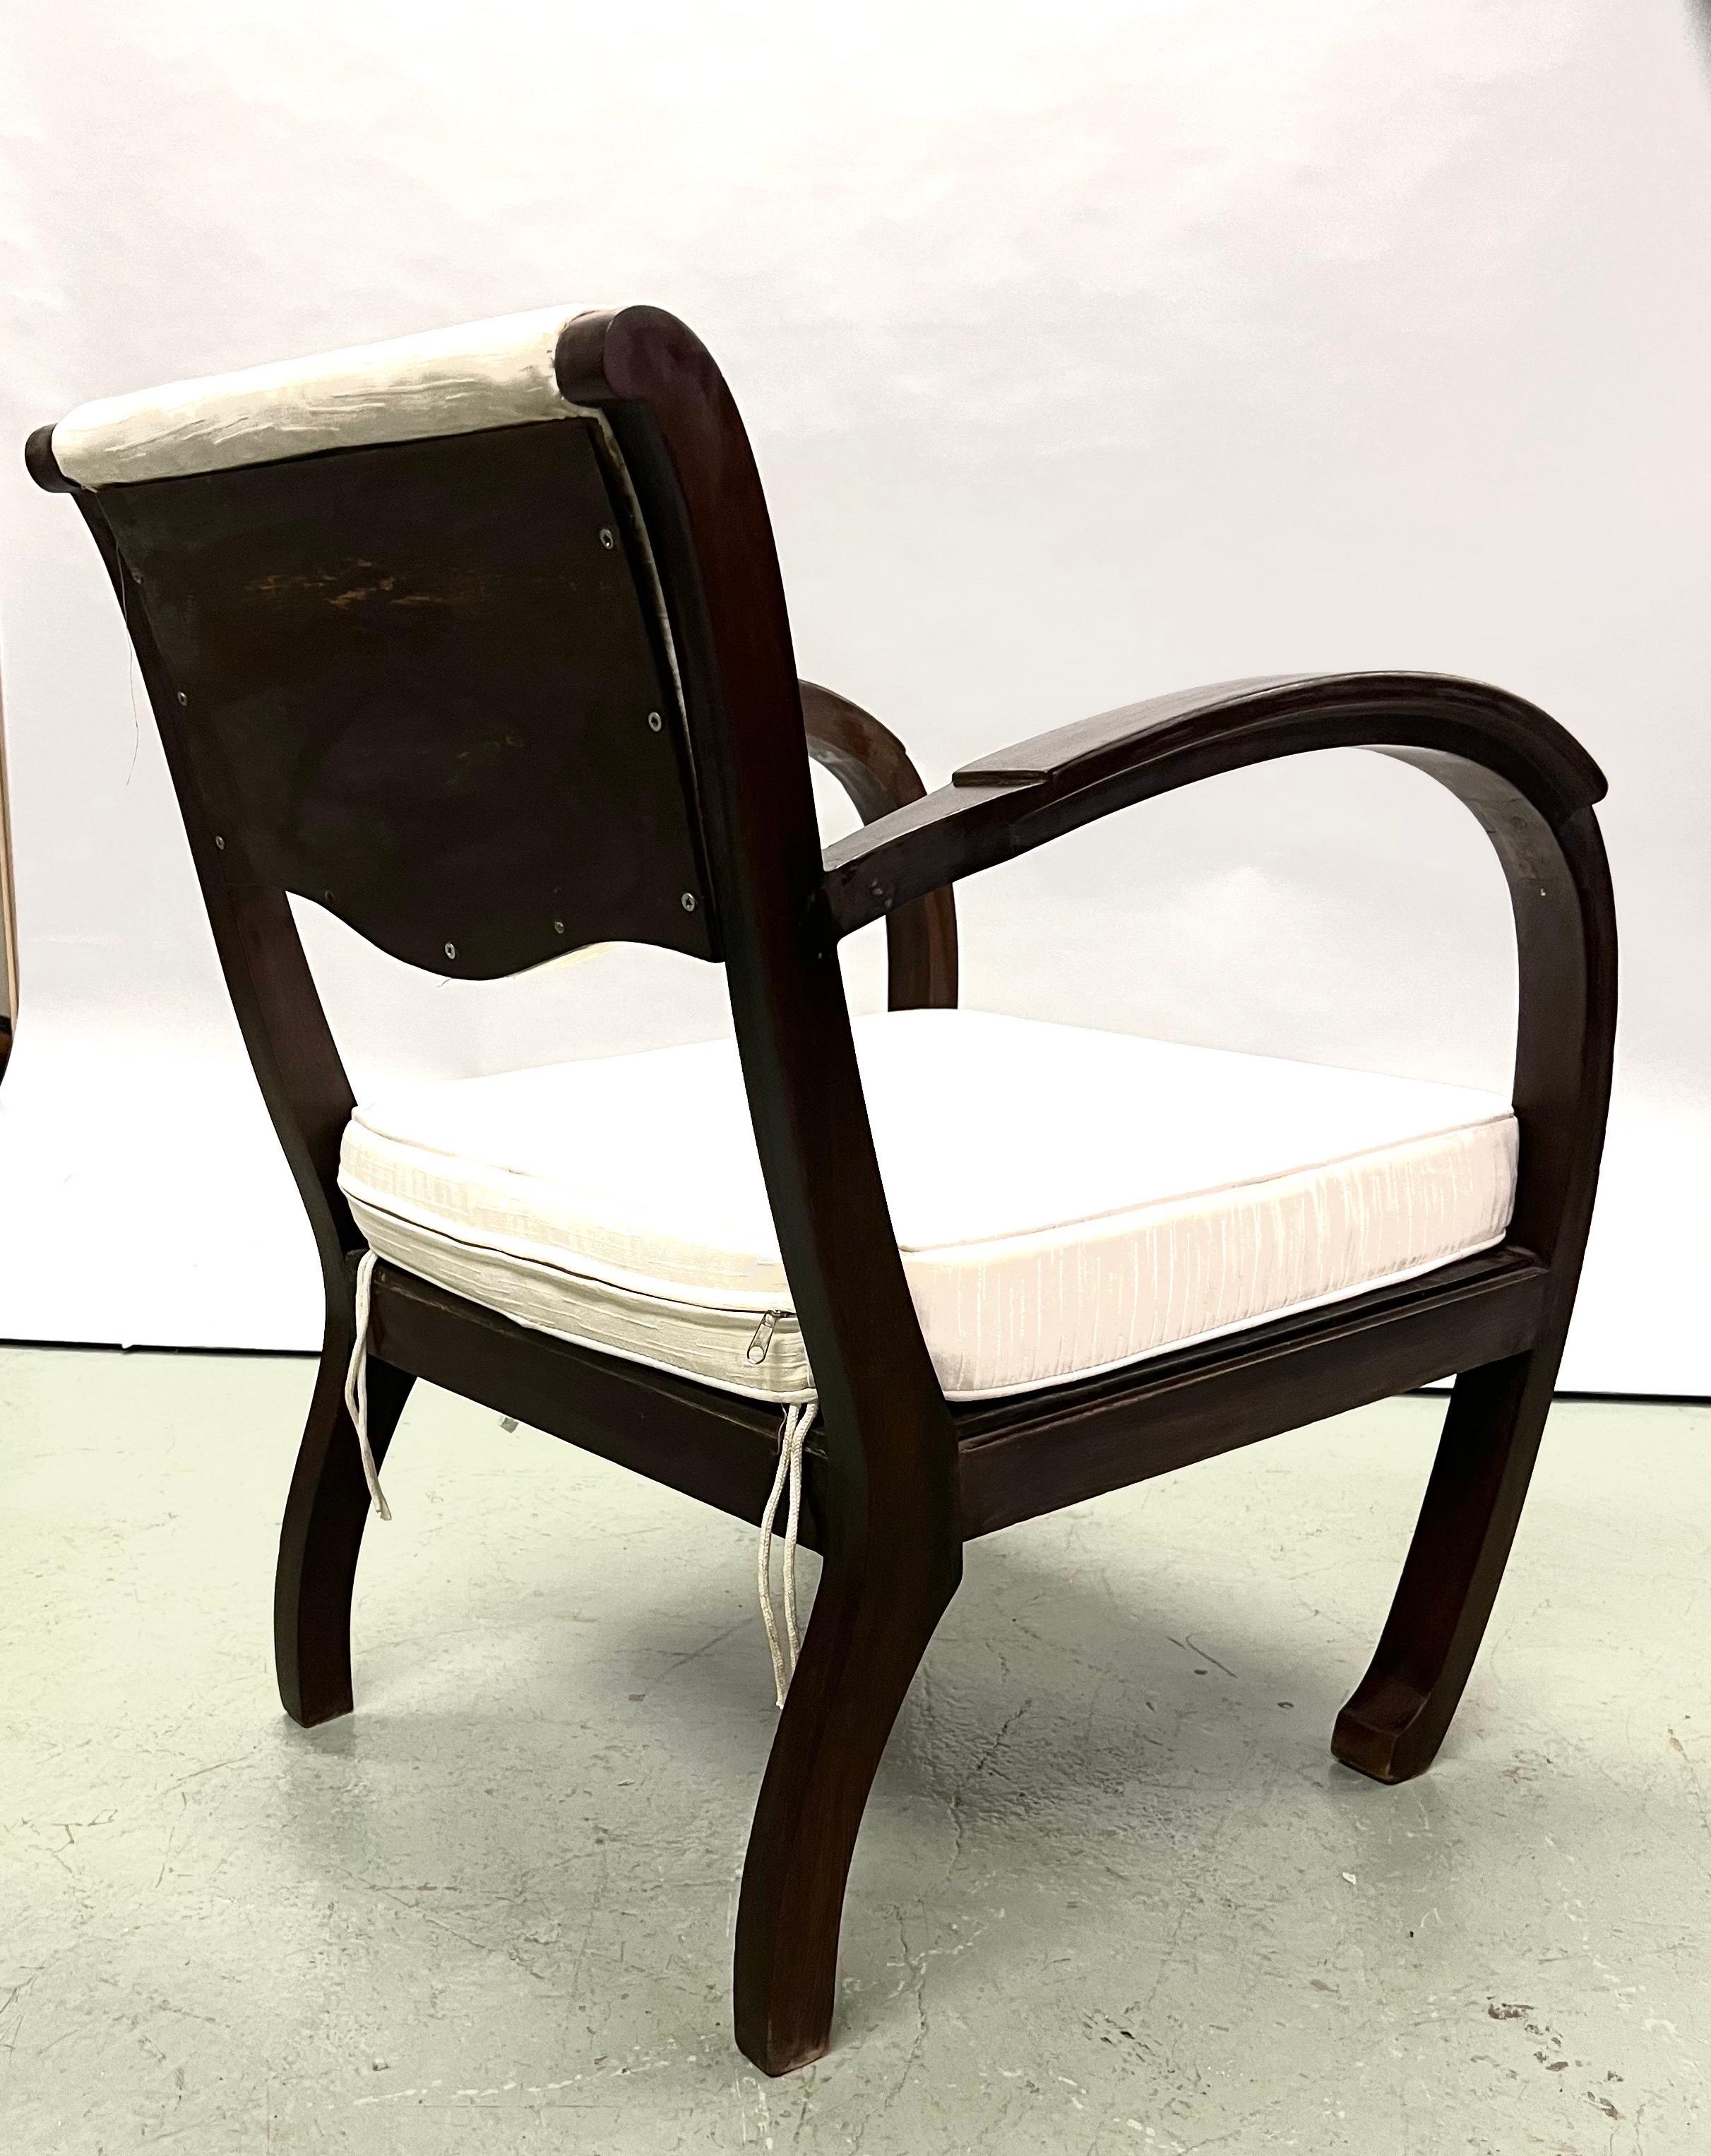 Rare French Art Deco Hand Carved Teak Armchairs/ Lounge Chairs, 1920-30 For Sale 6